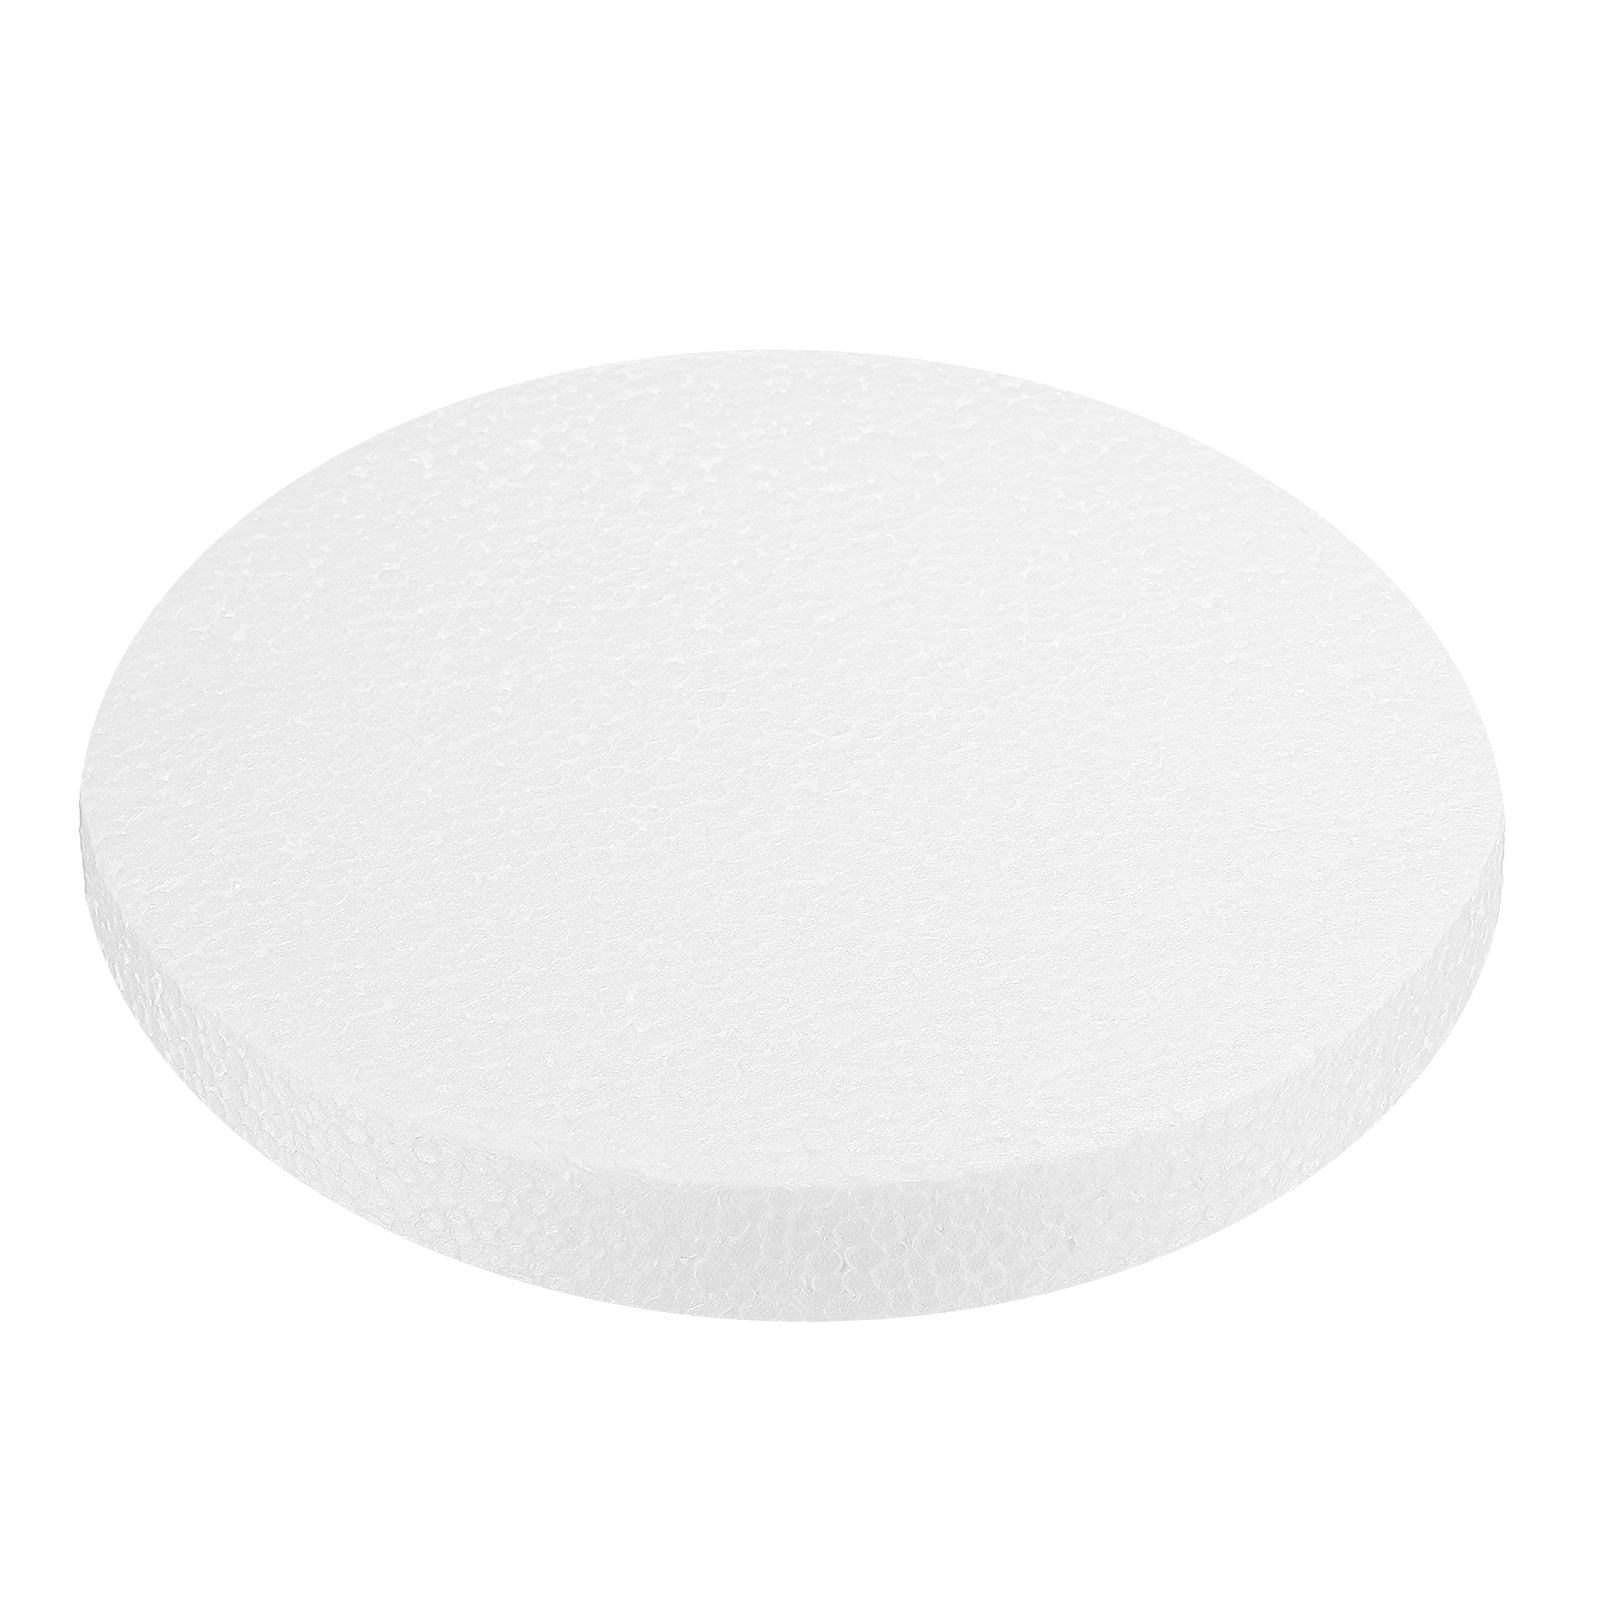 Round White Foam Disc, 10'' Diameter x 1'' Thick, Craft Supplies from Factory Direct Craft